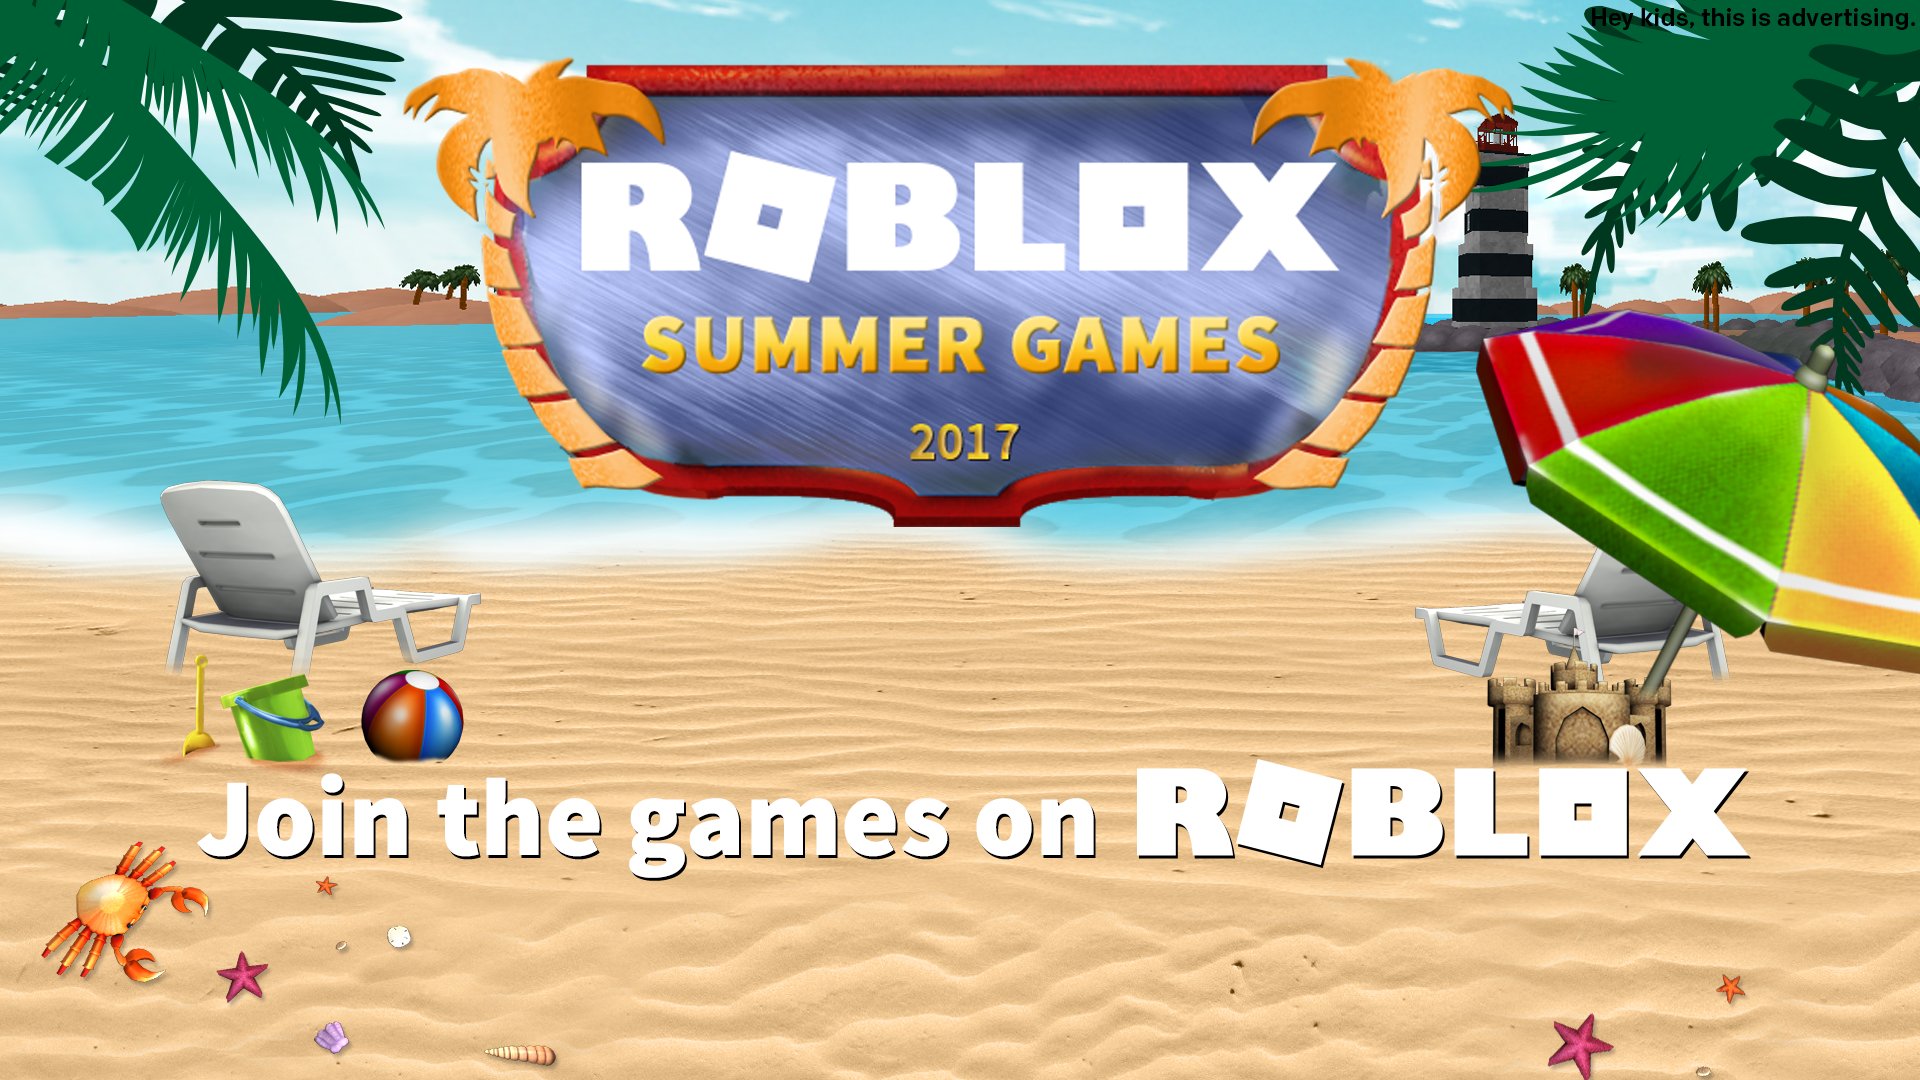 Roblox On Twitter Take A Trip To The Beach For The Roblox Summer